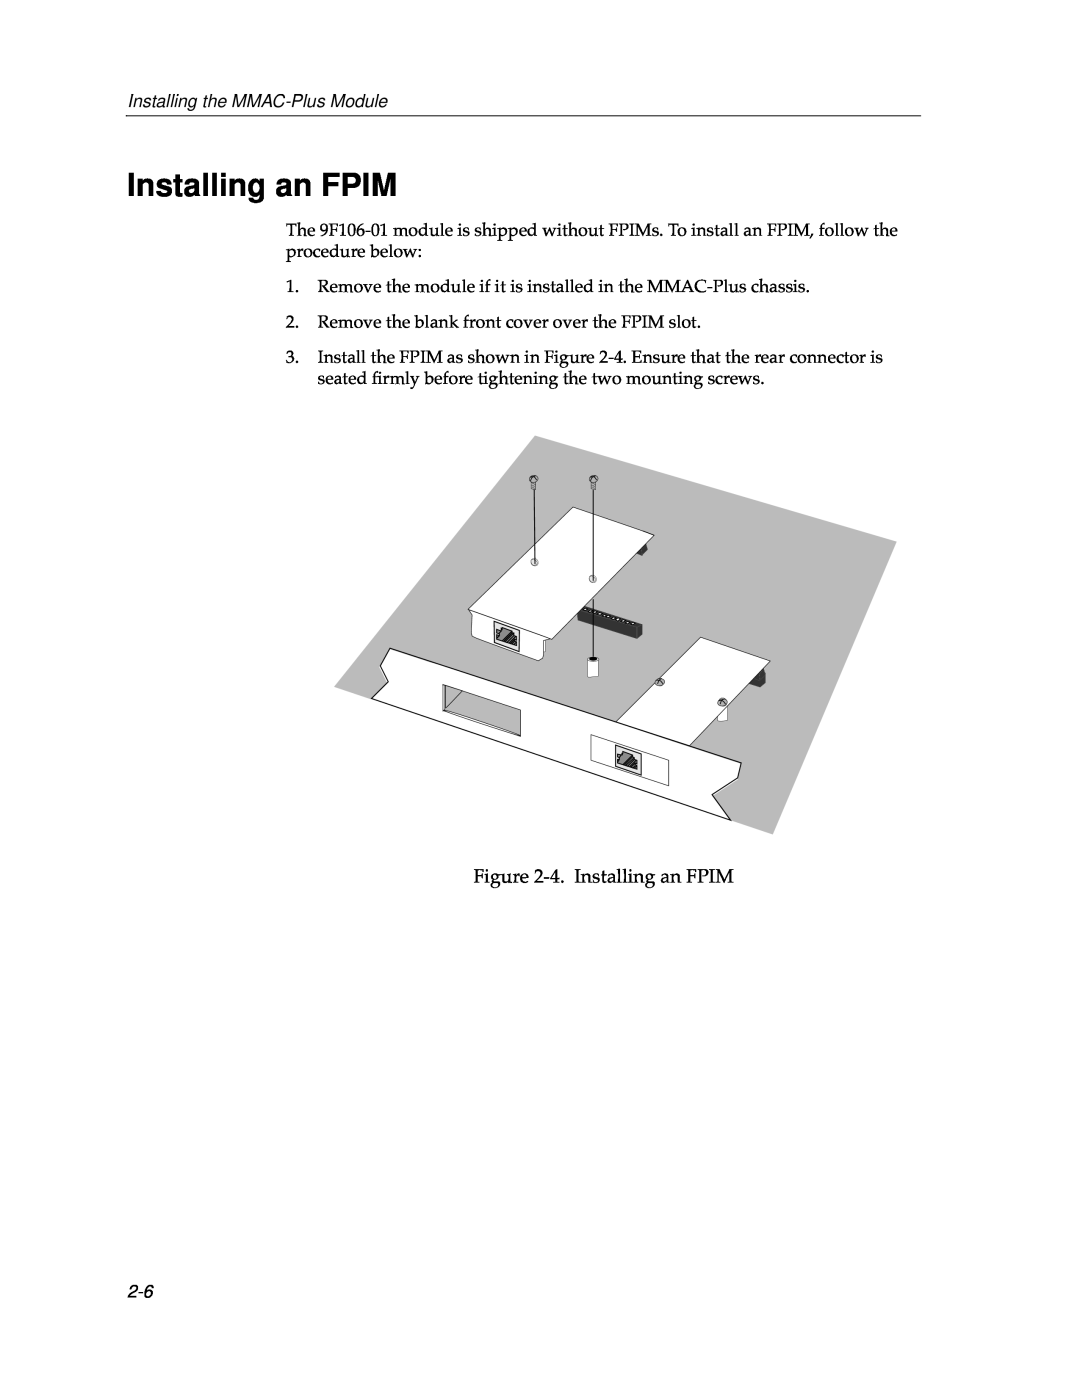 Cabletron Systems 9F106-01 manual 4.Installing an FPIM, Installing the MMAC-PlusModule 